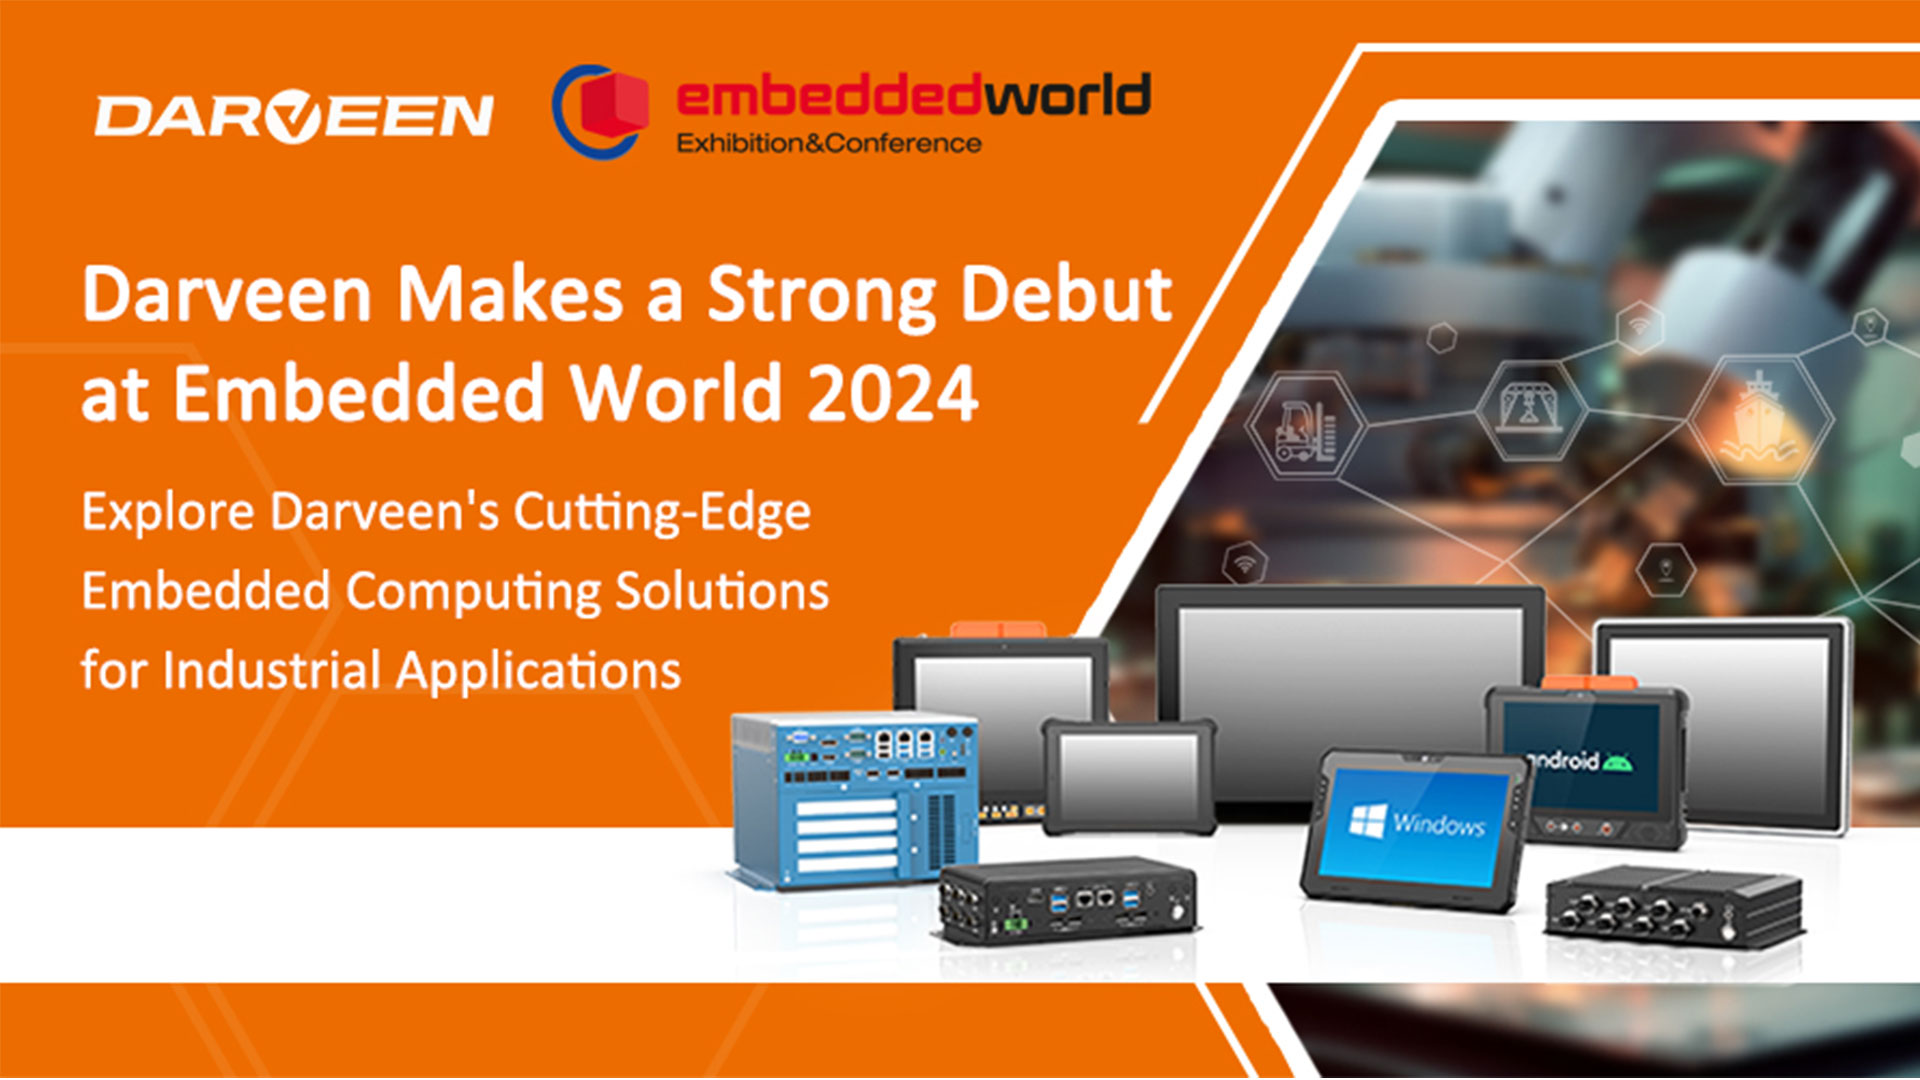 Darveen Makes a Strong Debut at Embedded World 2024